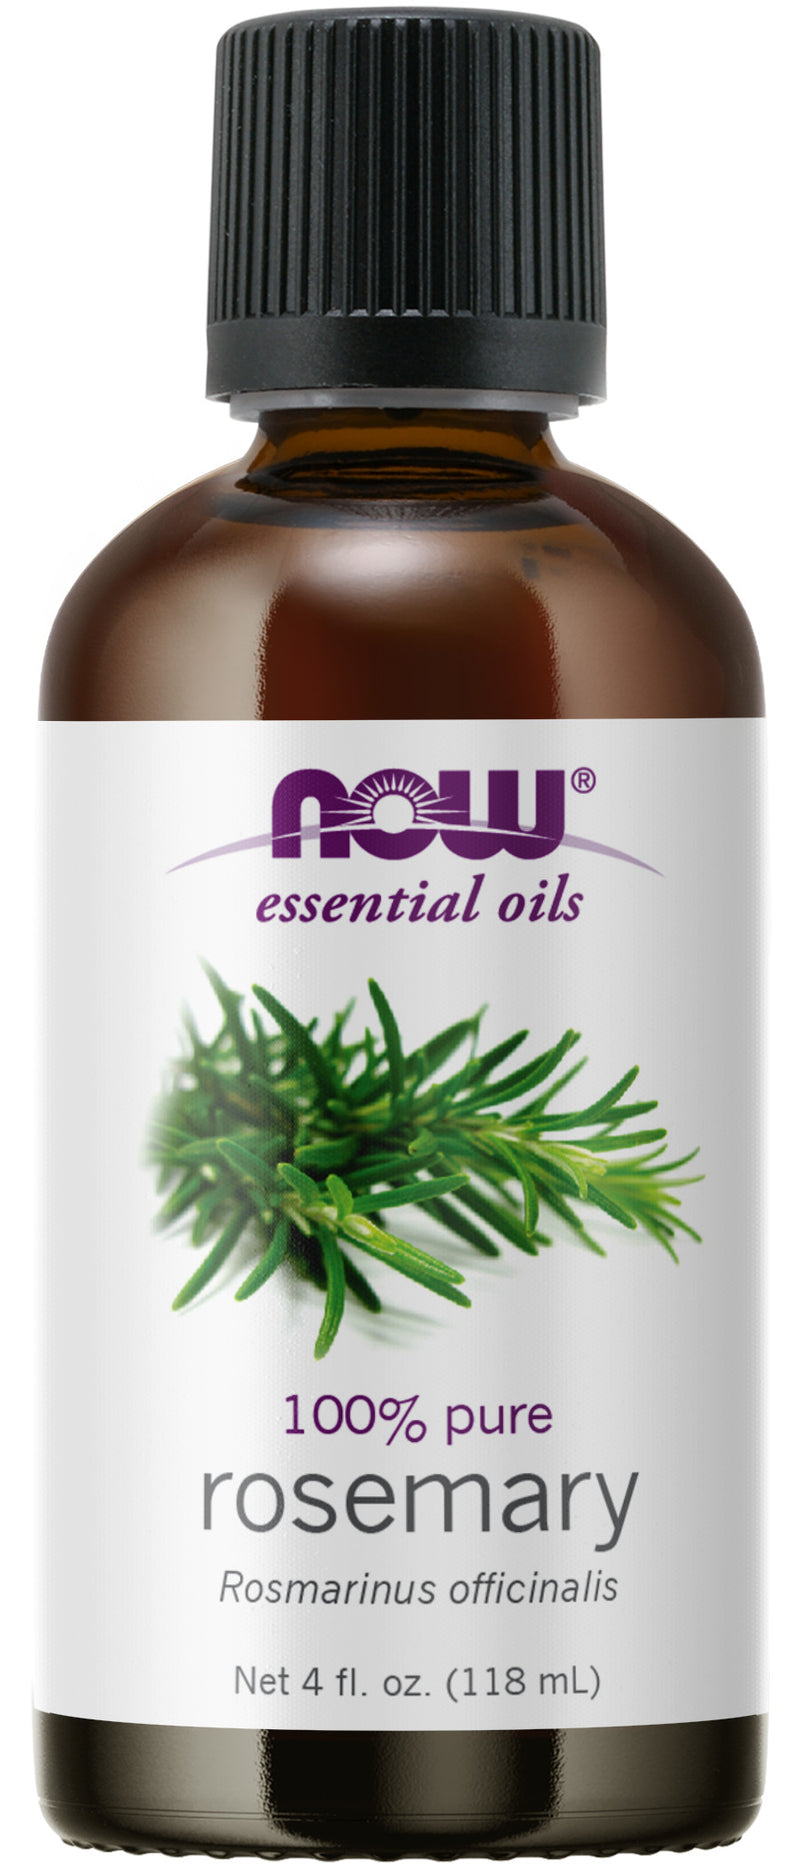 NOW Essential Oils, Rosemary Oil, Purifying Aromatherapy Scent, Steam Distilled, 100% Pure, Vegan, Child Resistant Cap, 4-Ounce